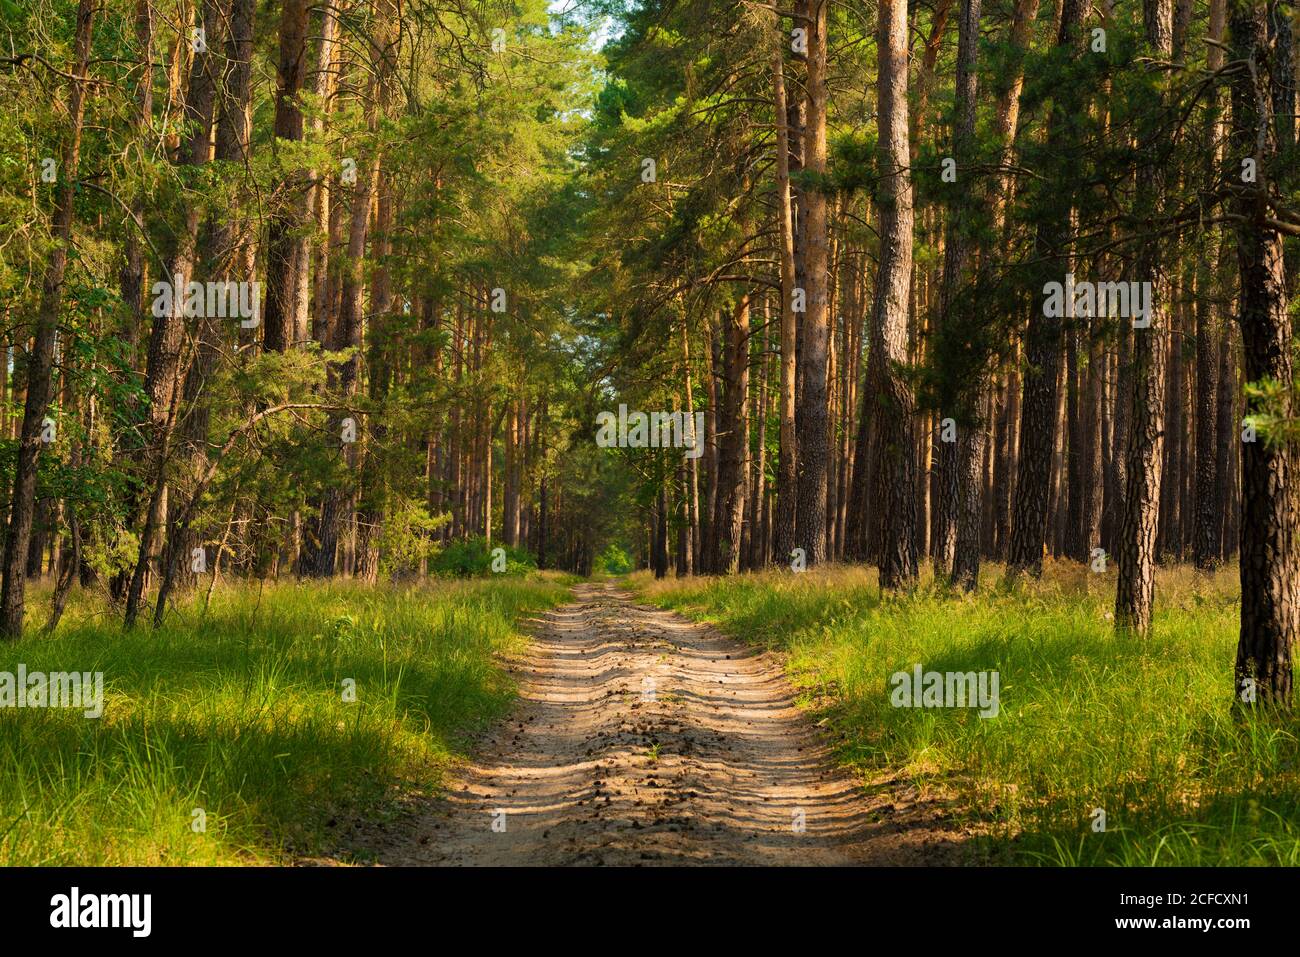 Sand Road In Forest High Resolution Stock Photography and Images - Alamy